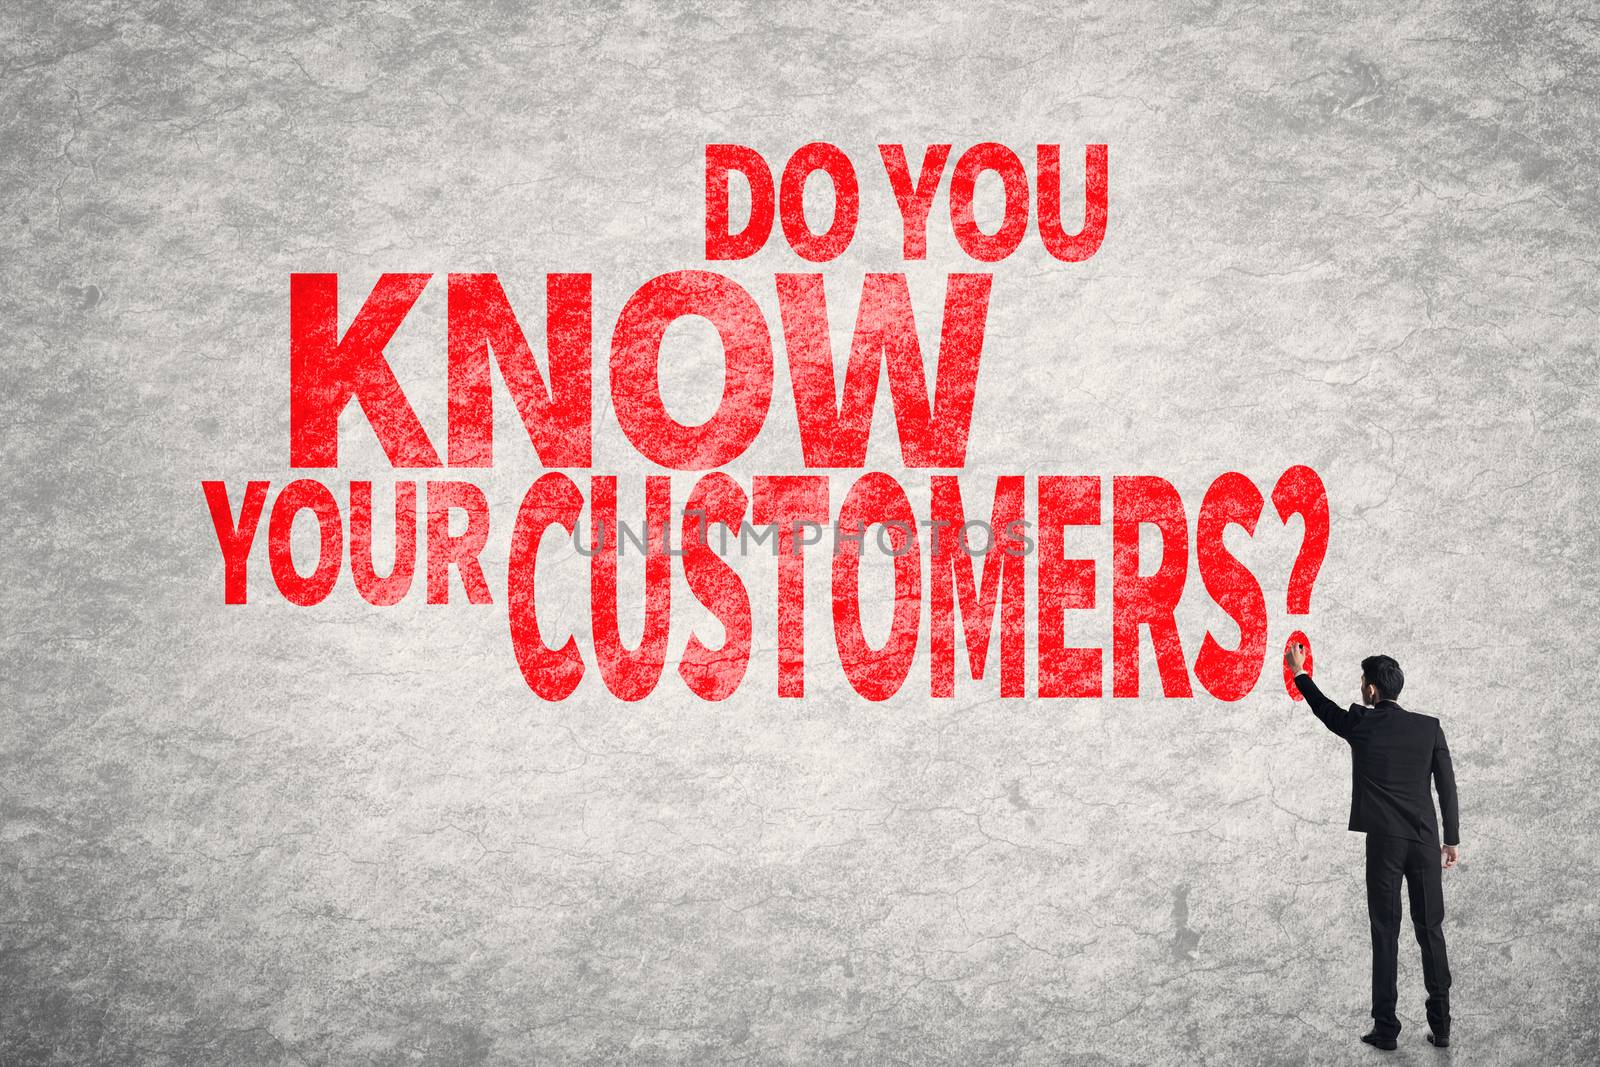 Do you Know your Customers? by elwynn